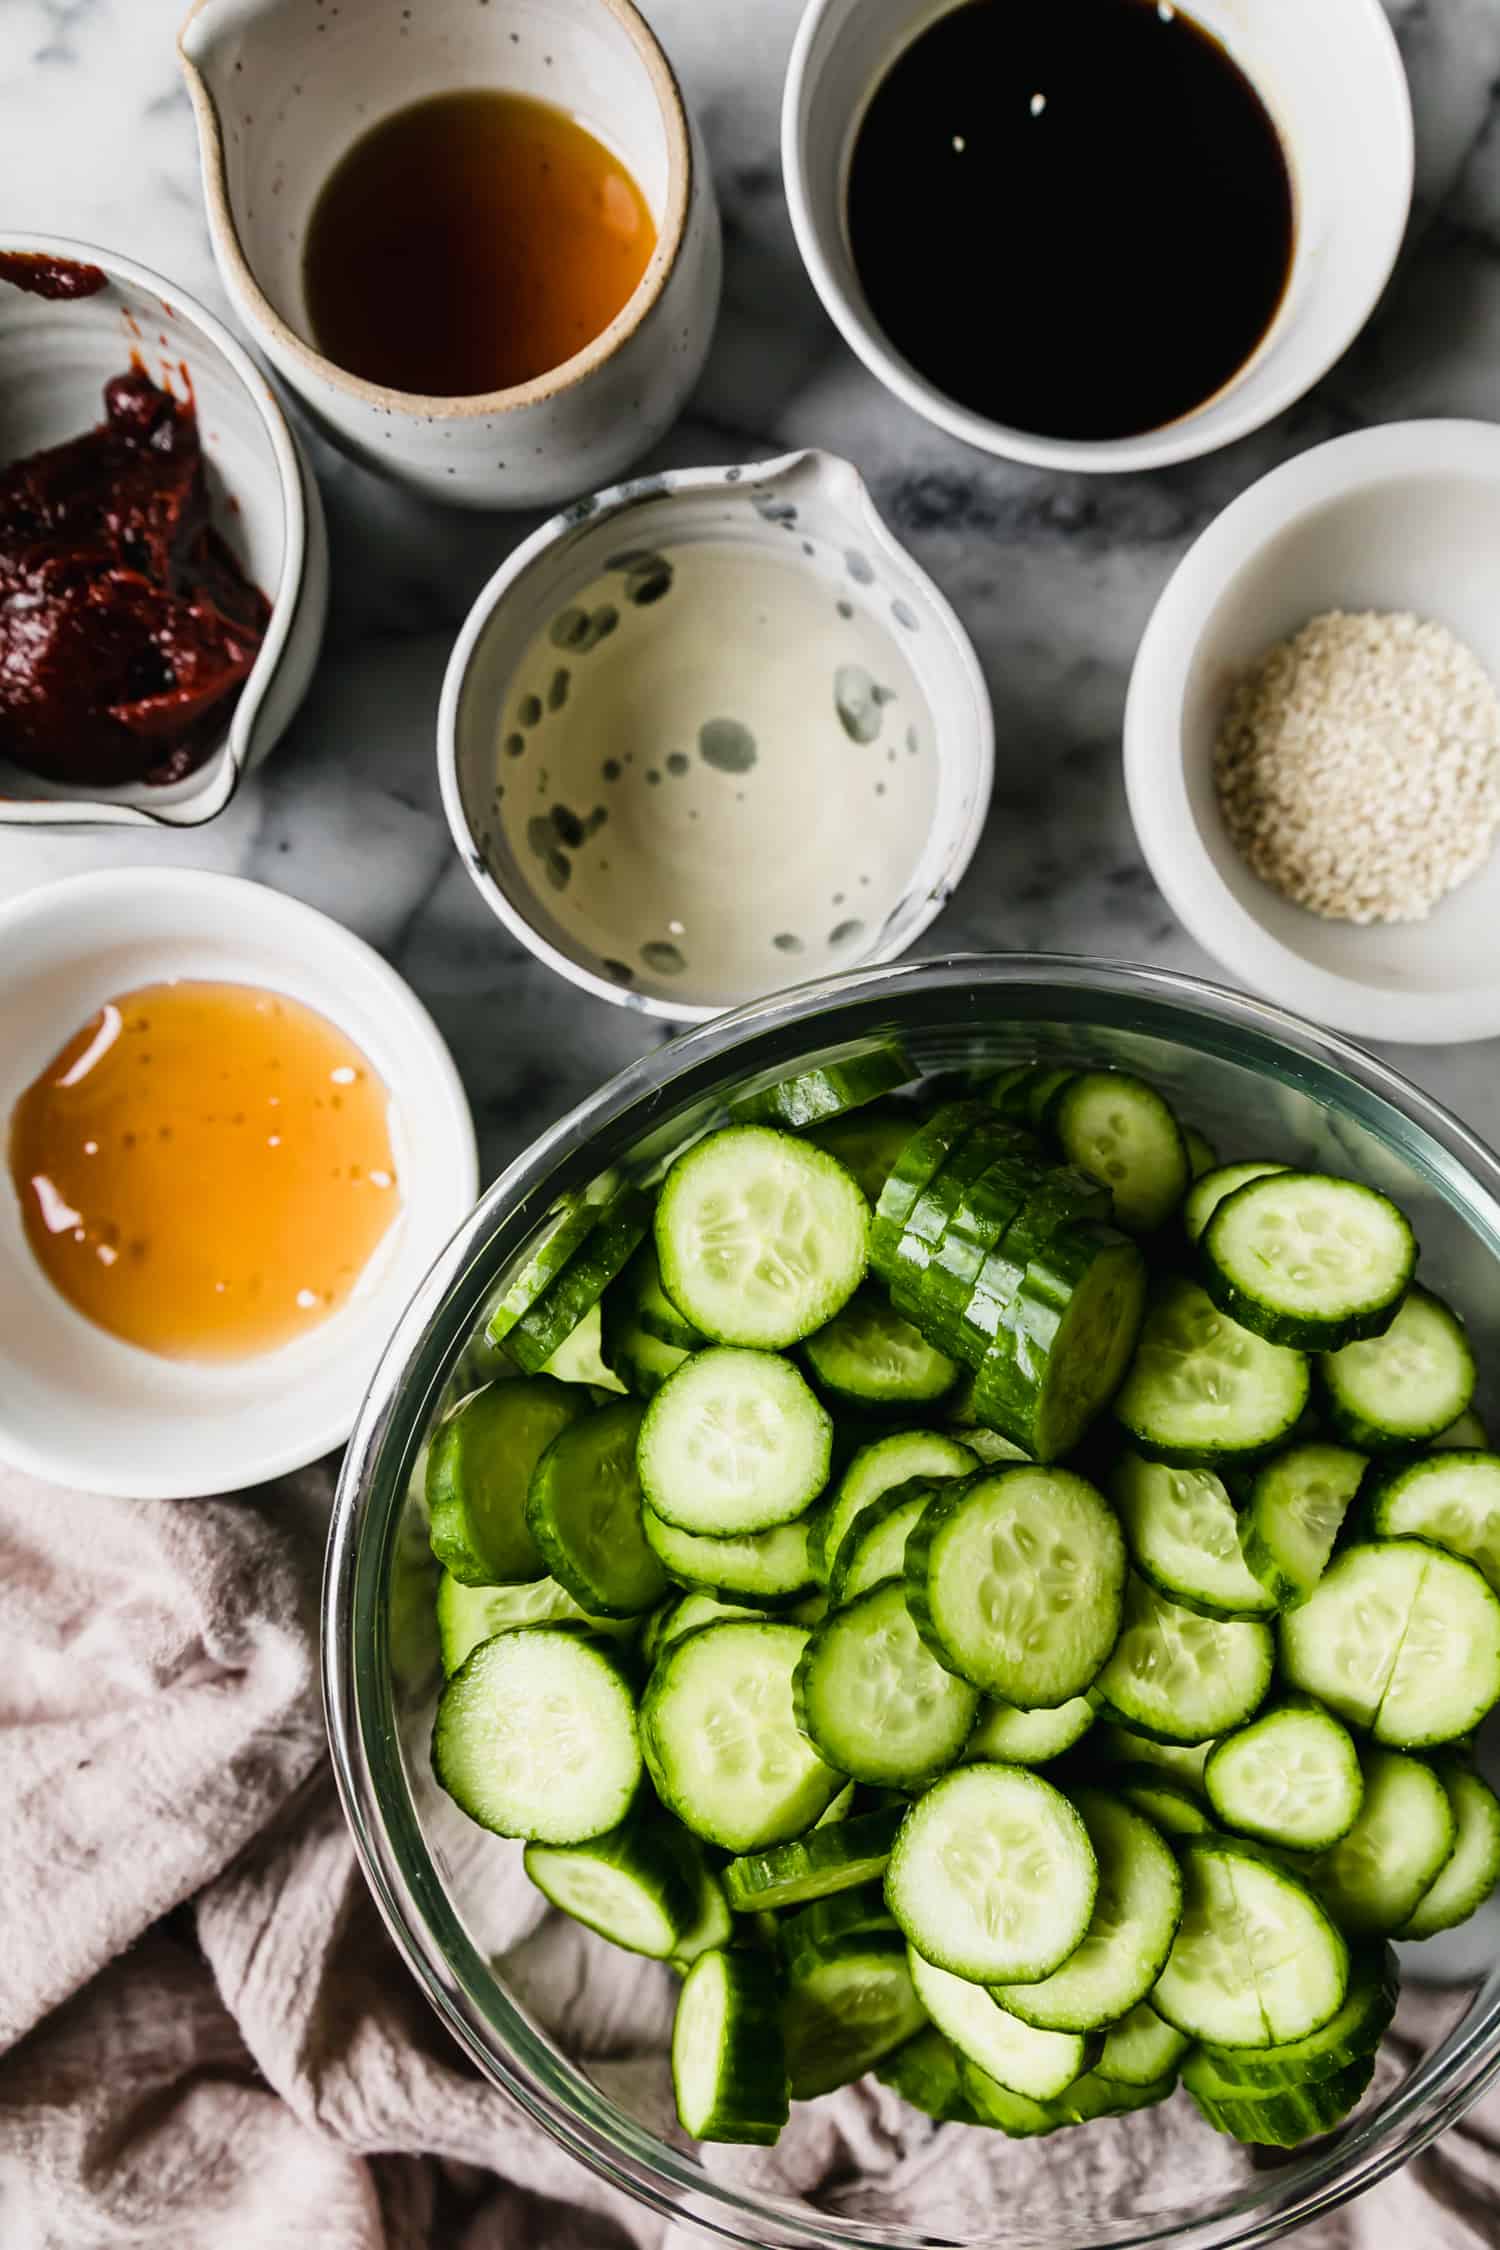 ingredients prepped in bowls to make cucumber salad